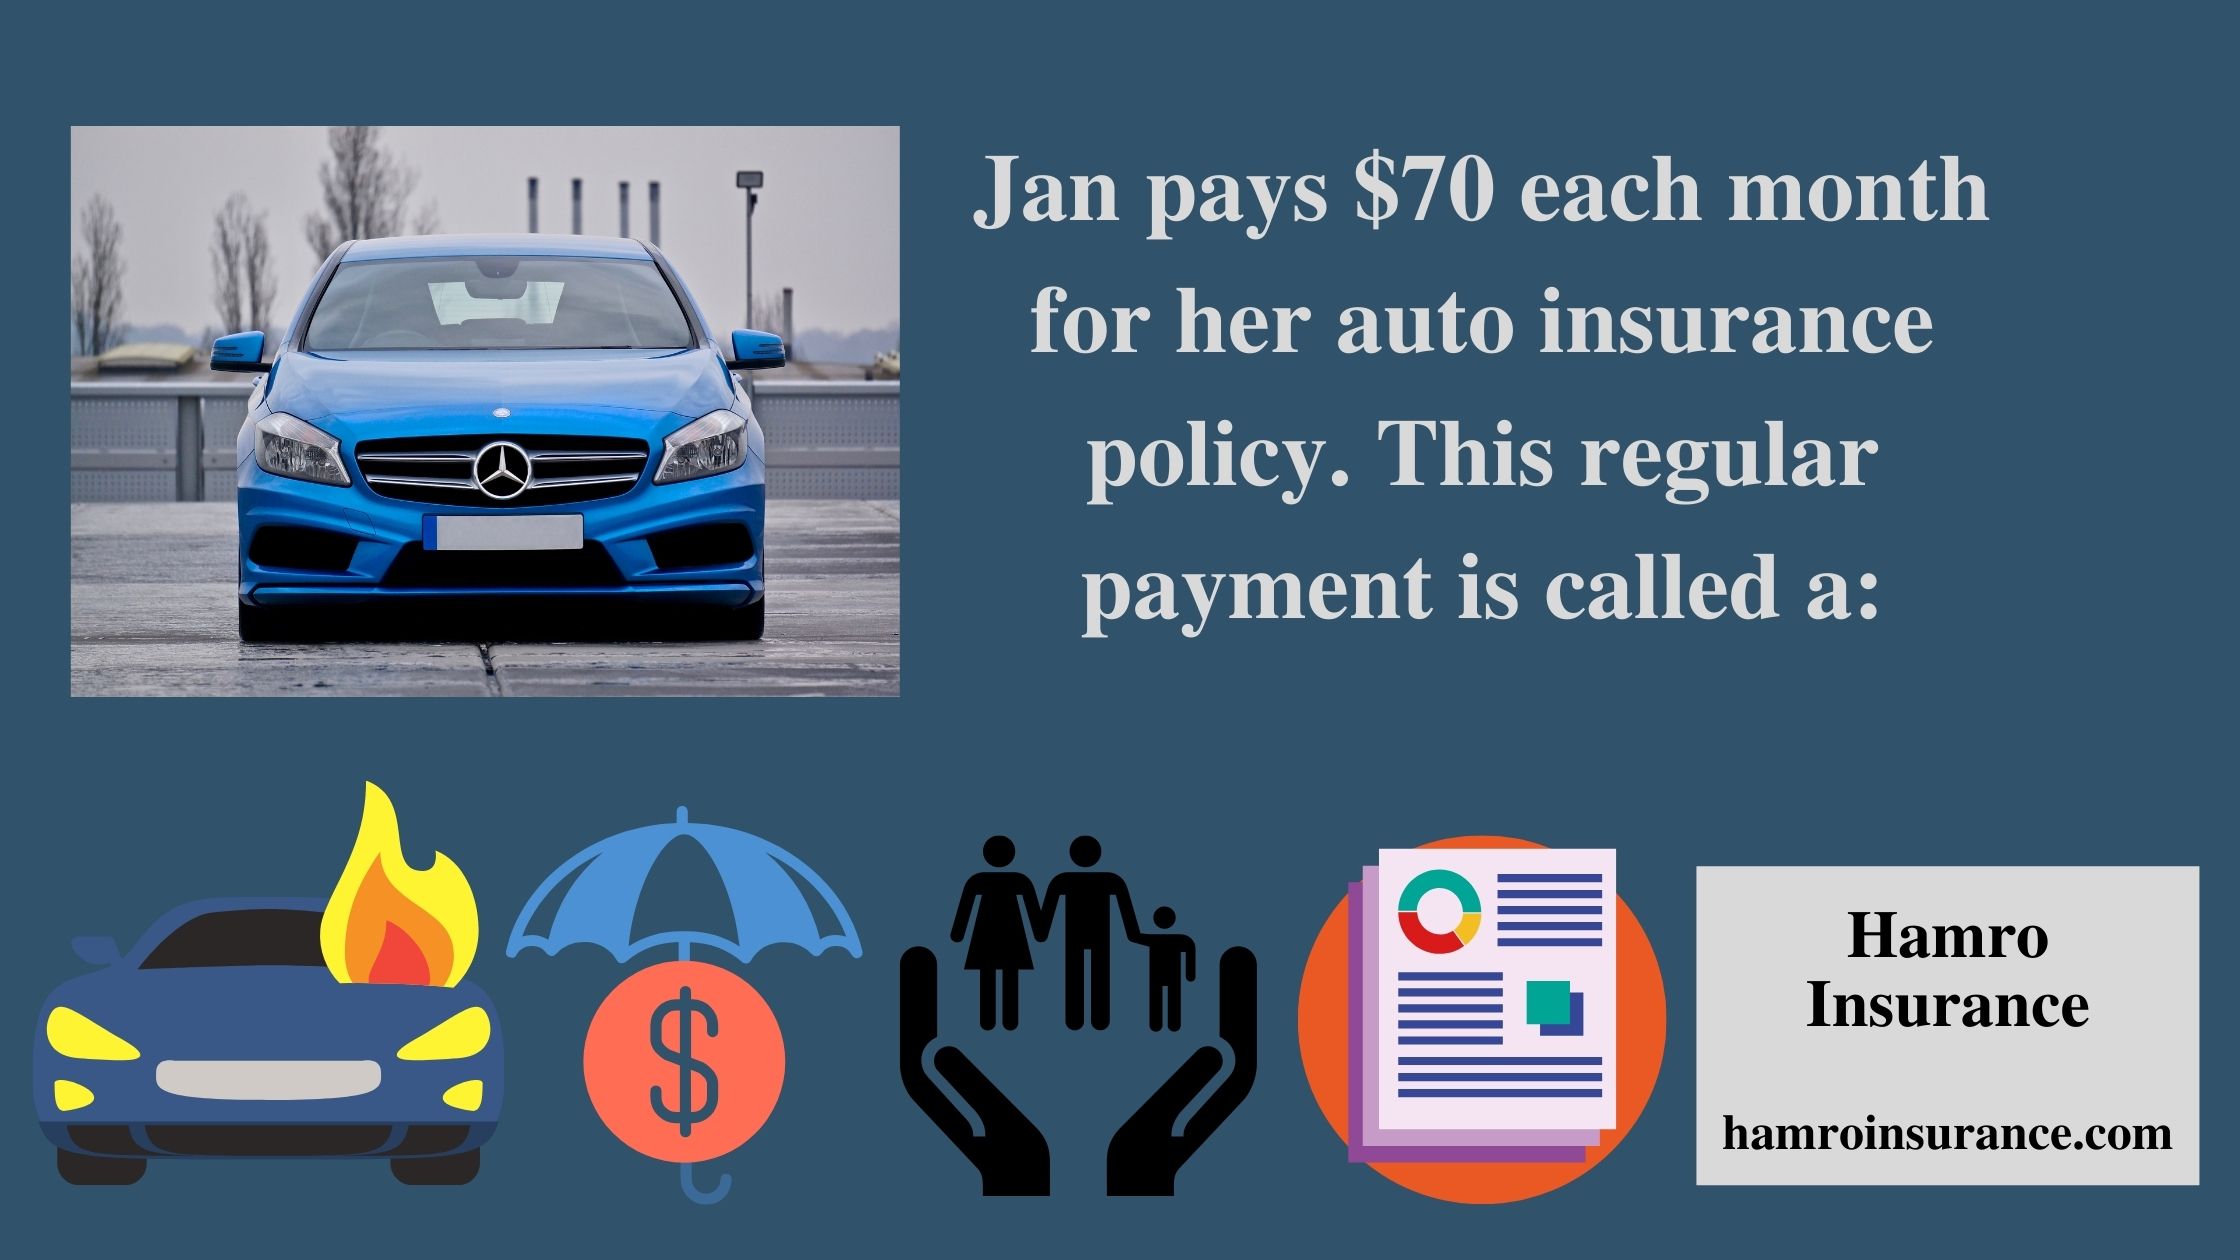 Jan pays $70 each month for her auto insurance policy. This regular payment is called a: